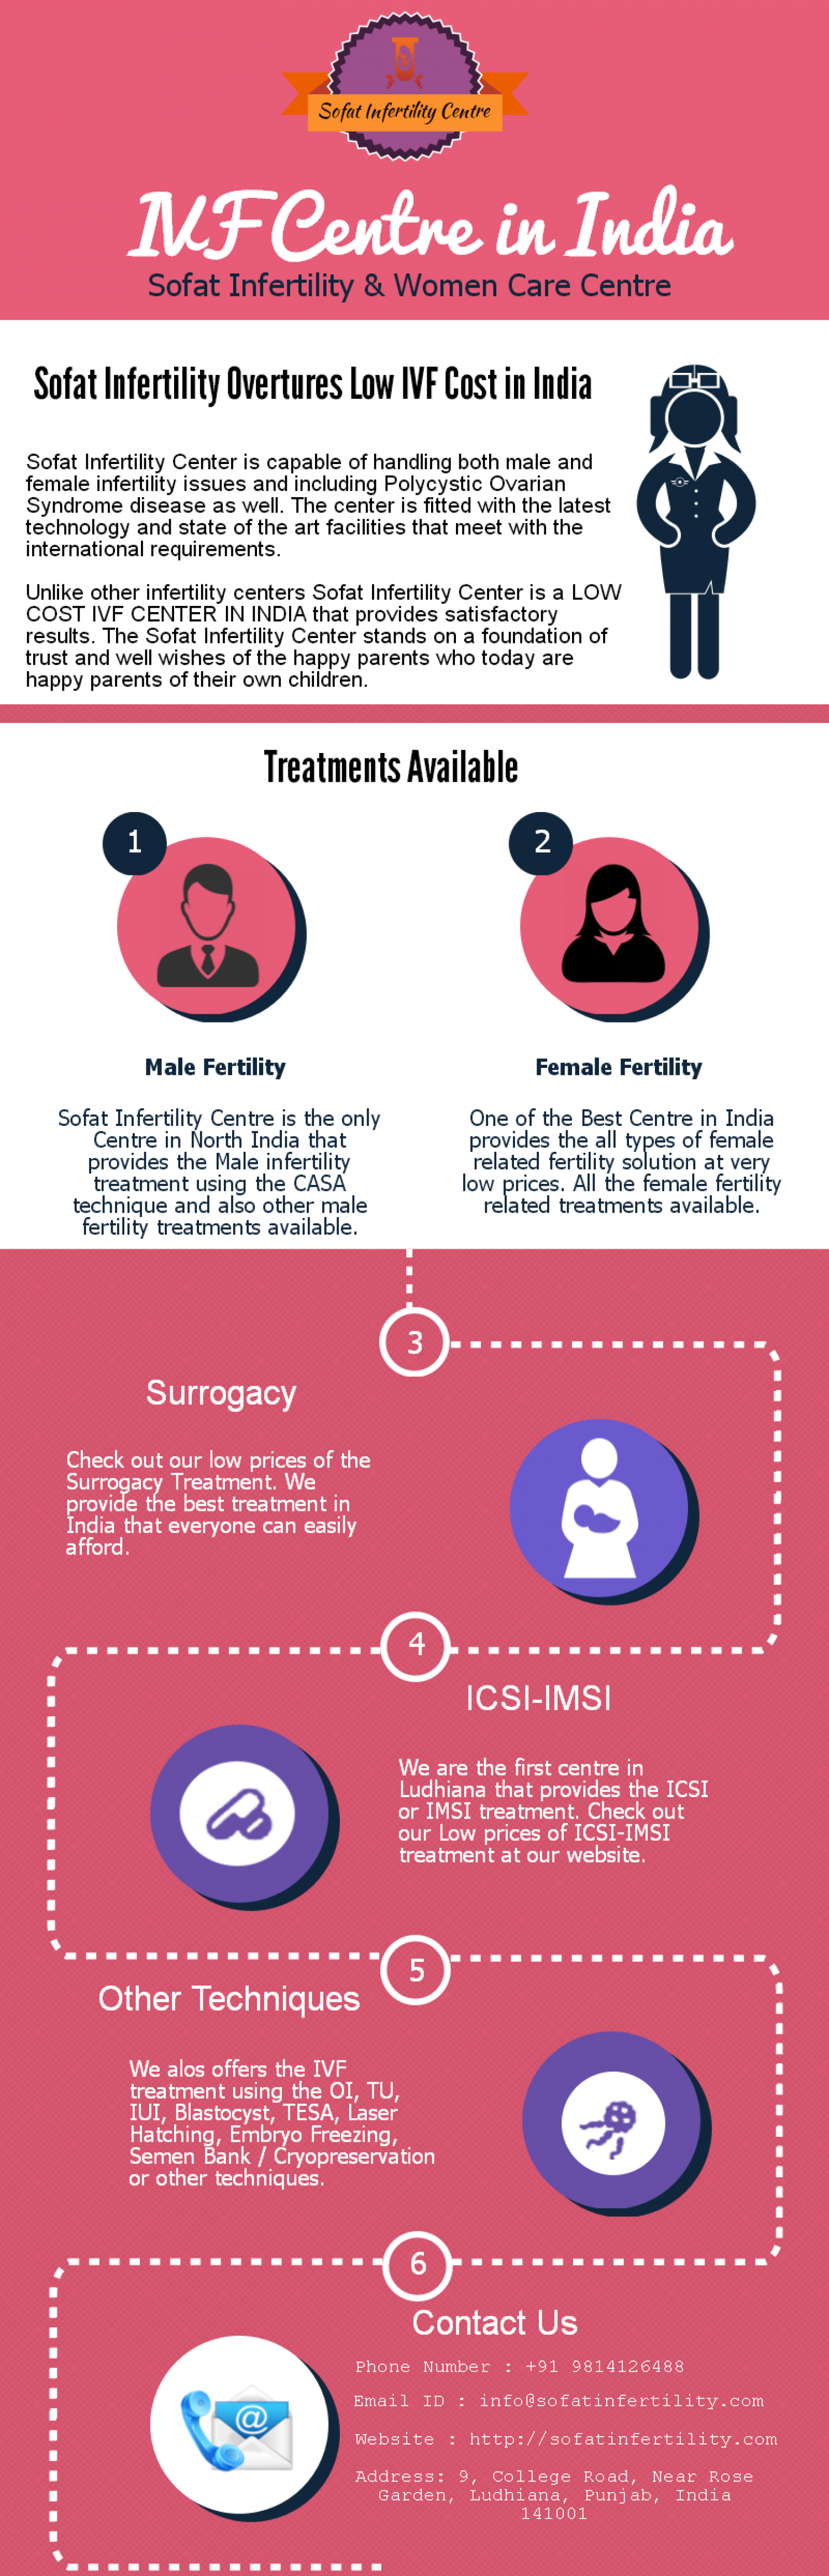 Why Sofat Infertility is the Best IVF Centre in India? Infographic